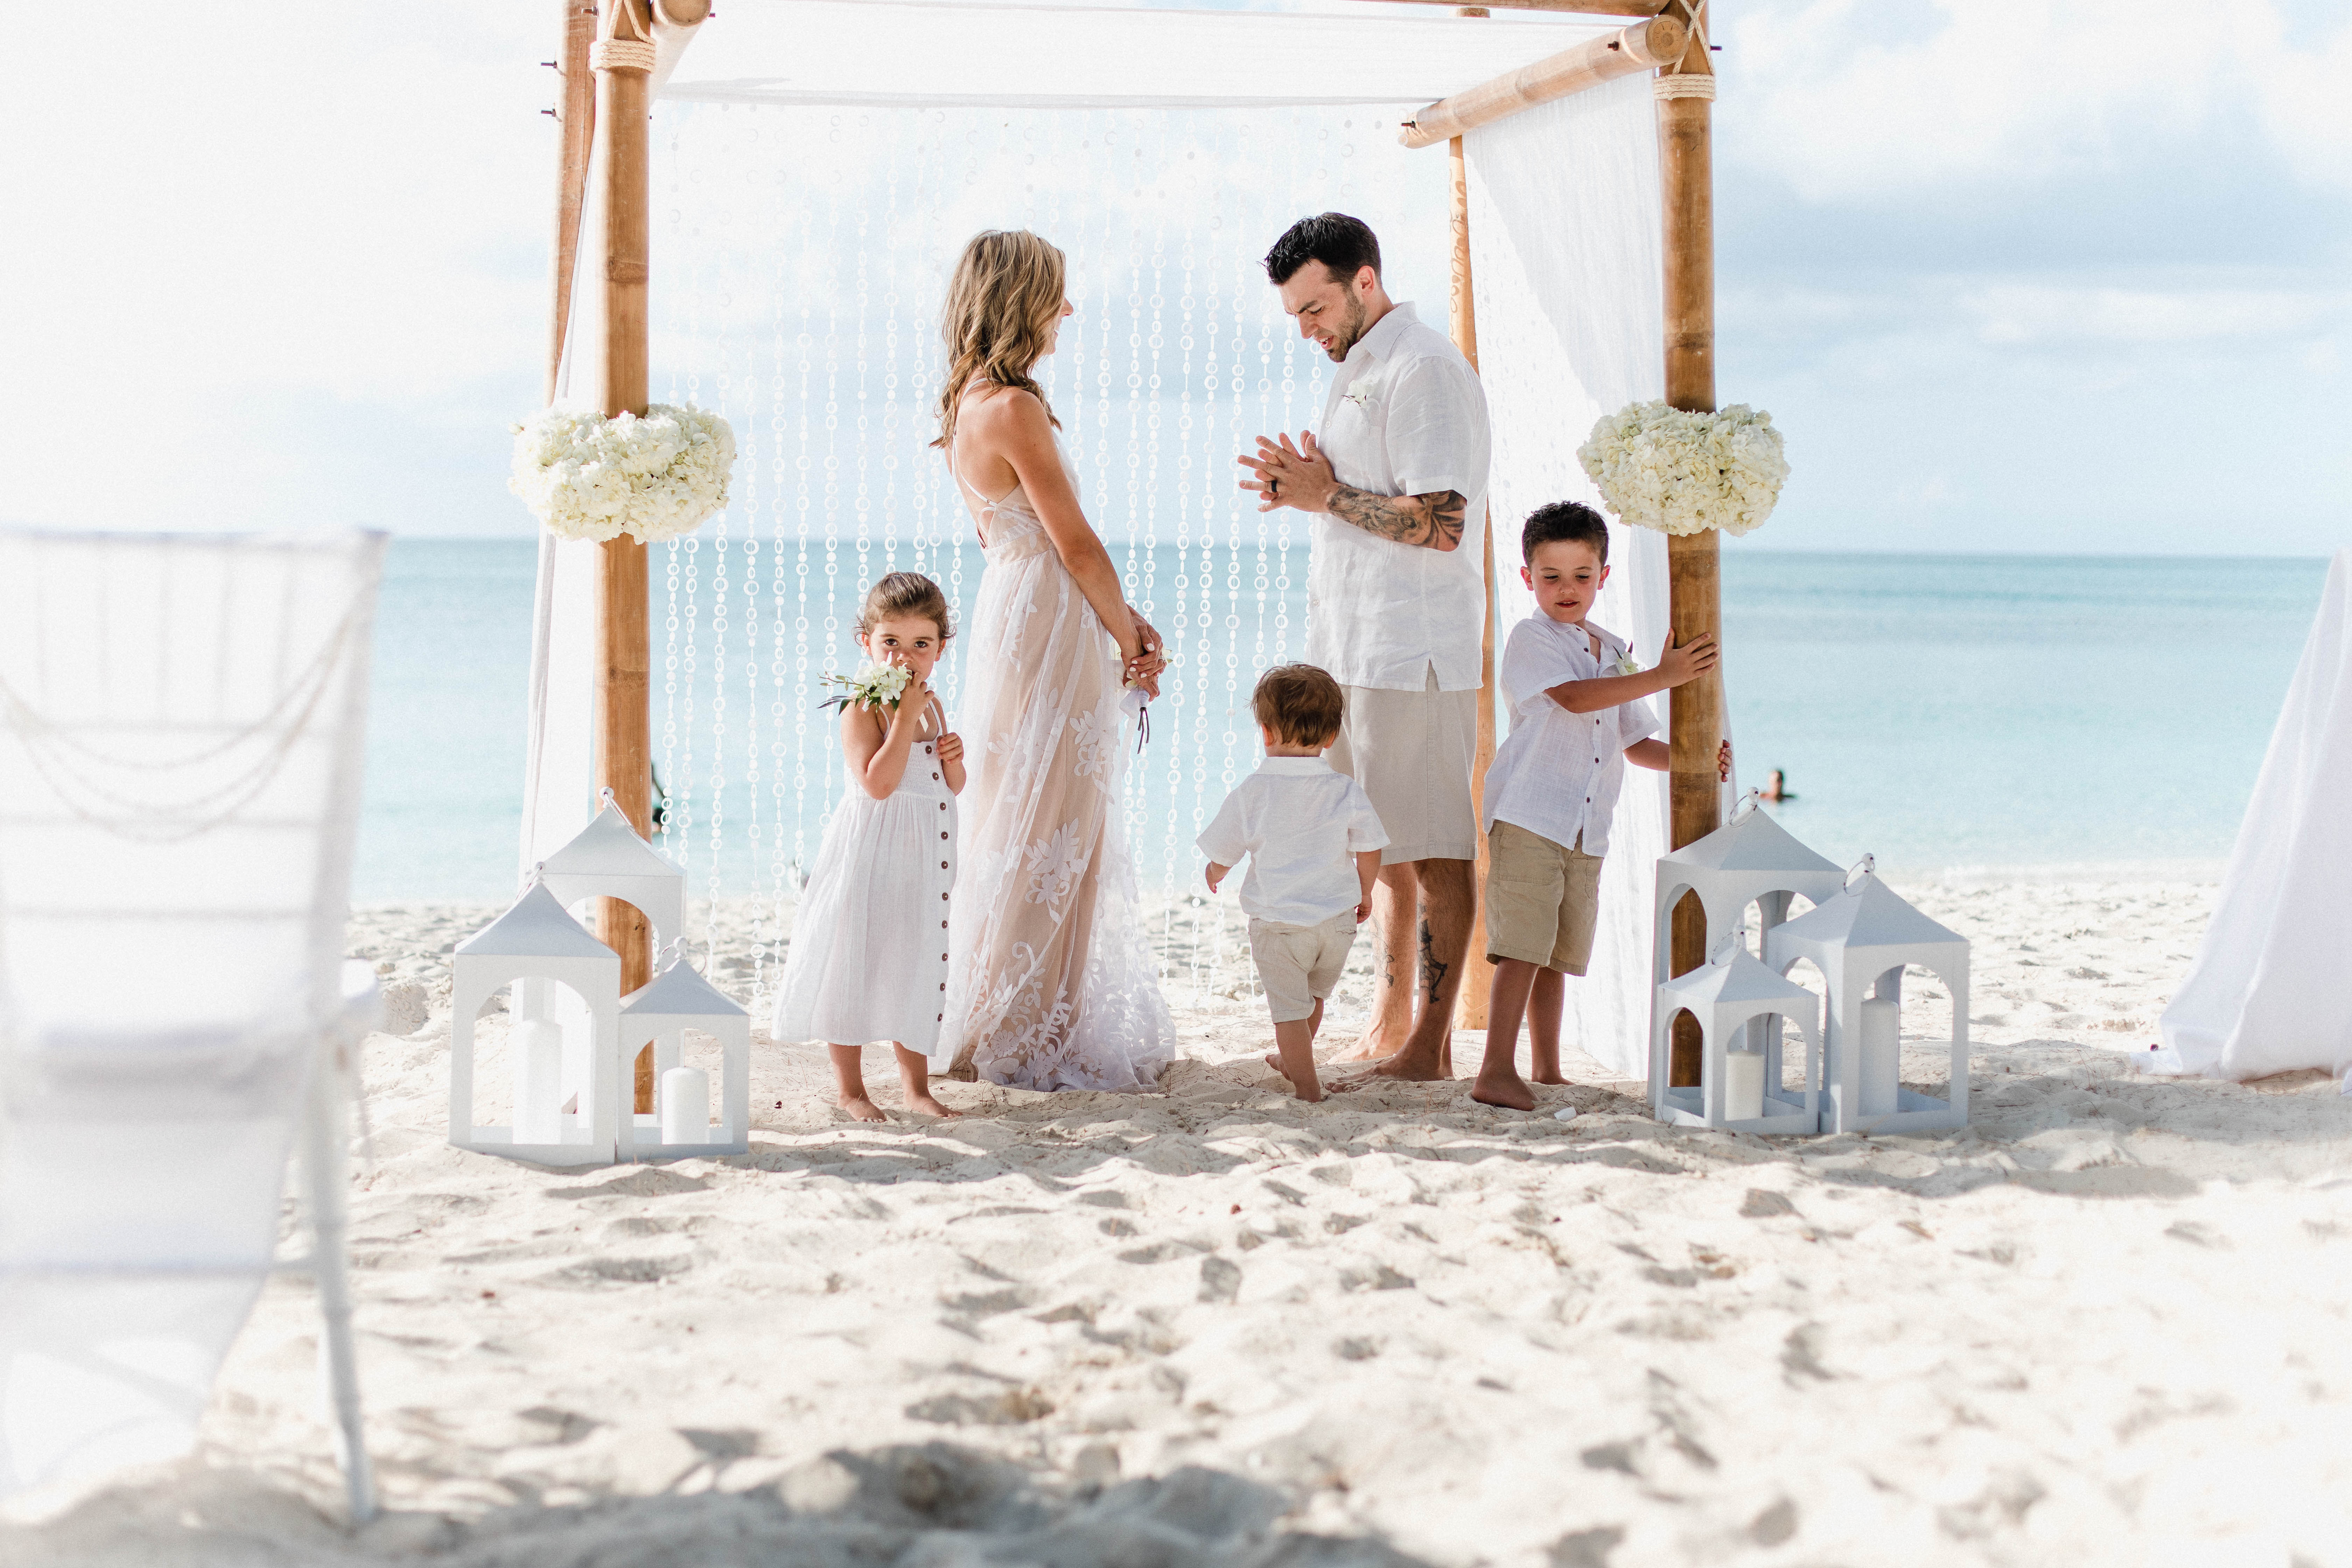 Thinking of renewing your vows? Connecticut life and style blogger Lauren McBride shares about her 10 year vow renewal ceremony at Beaches Turks & Caicos.